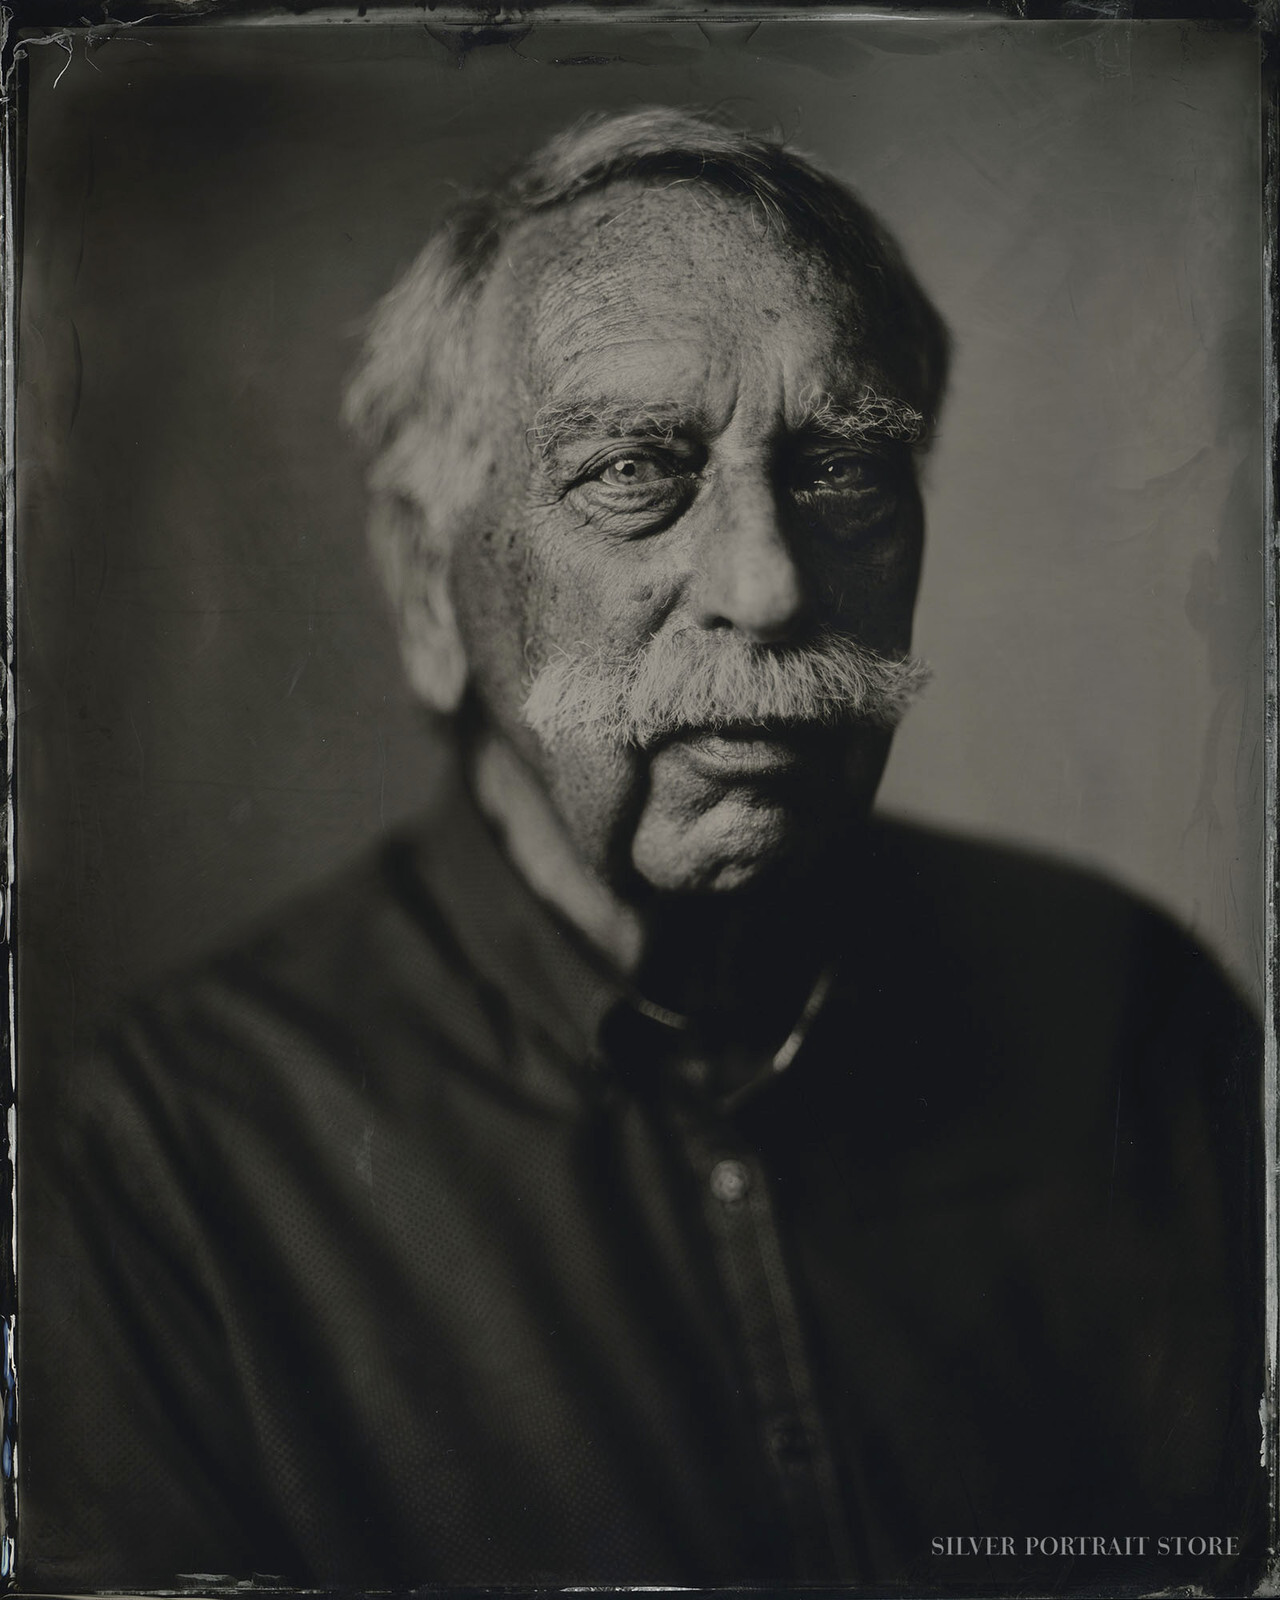 Frits-Silver Portrait Store-Wet plate collodion-Tintype 20 x 25 cm.